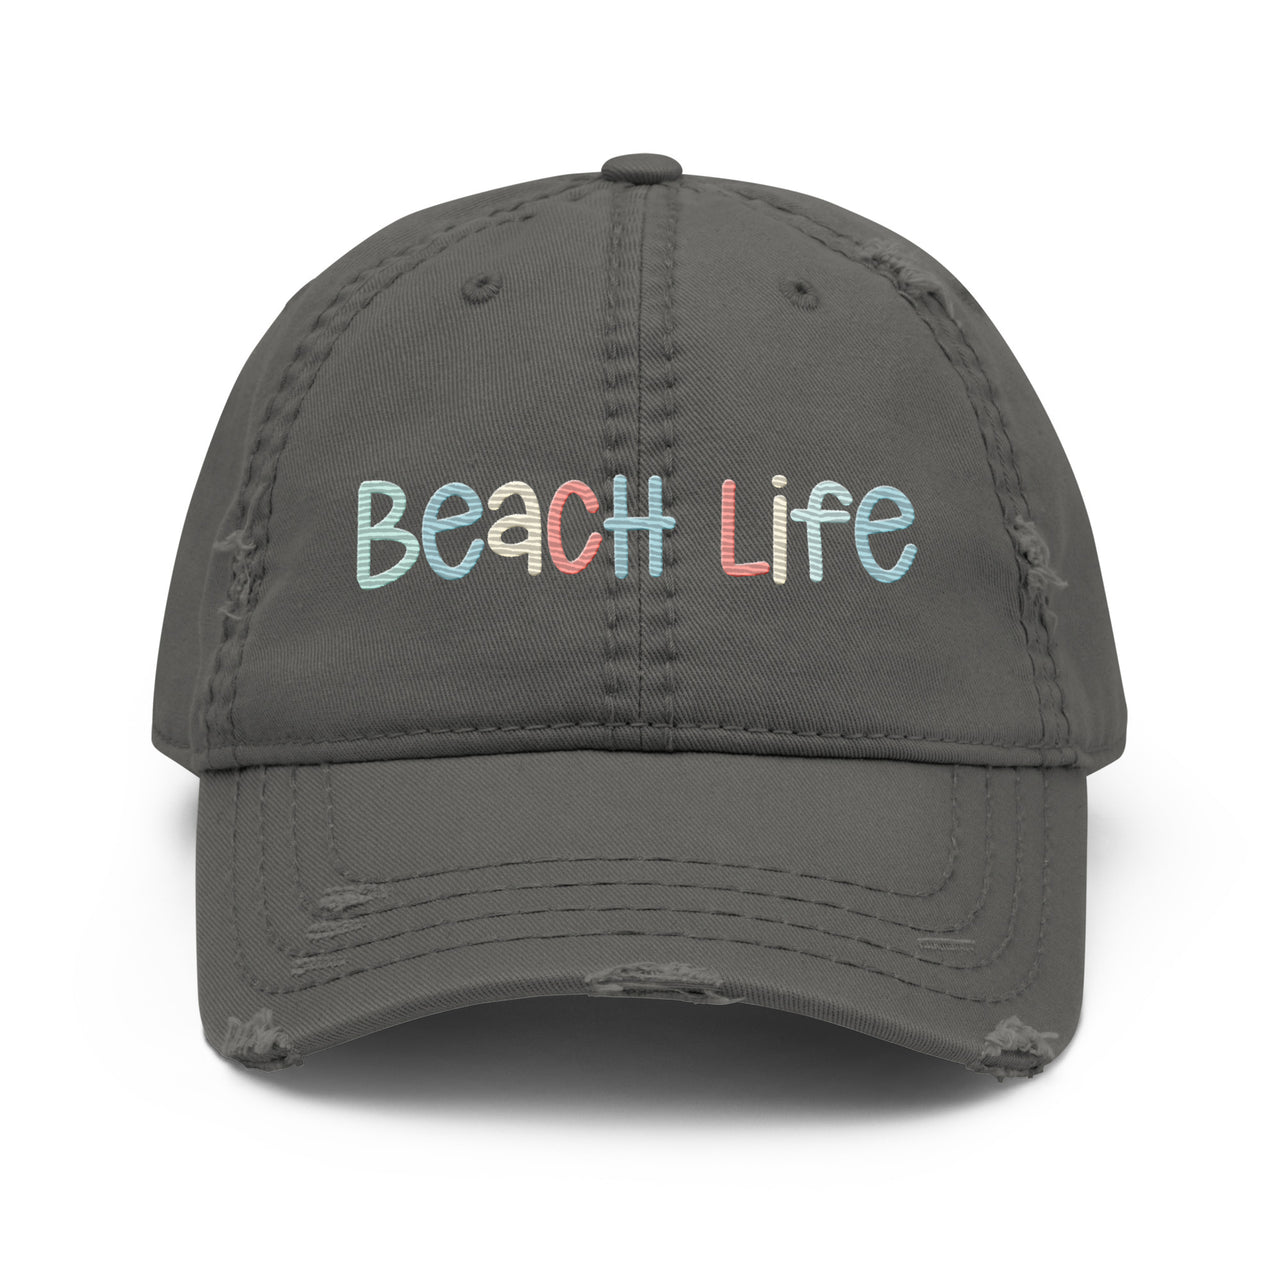 Beach Life Distressed Hat, Baseball Cap  New England Trading Co Charcoal Grey  